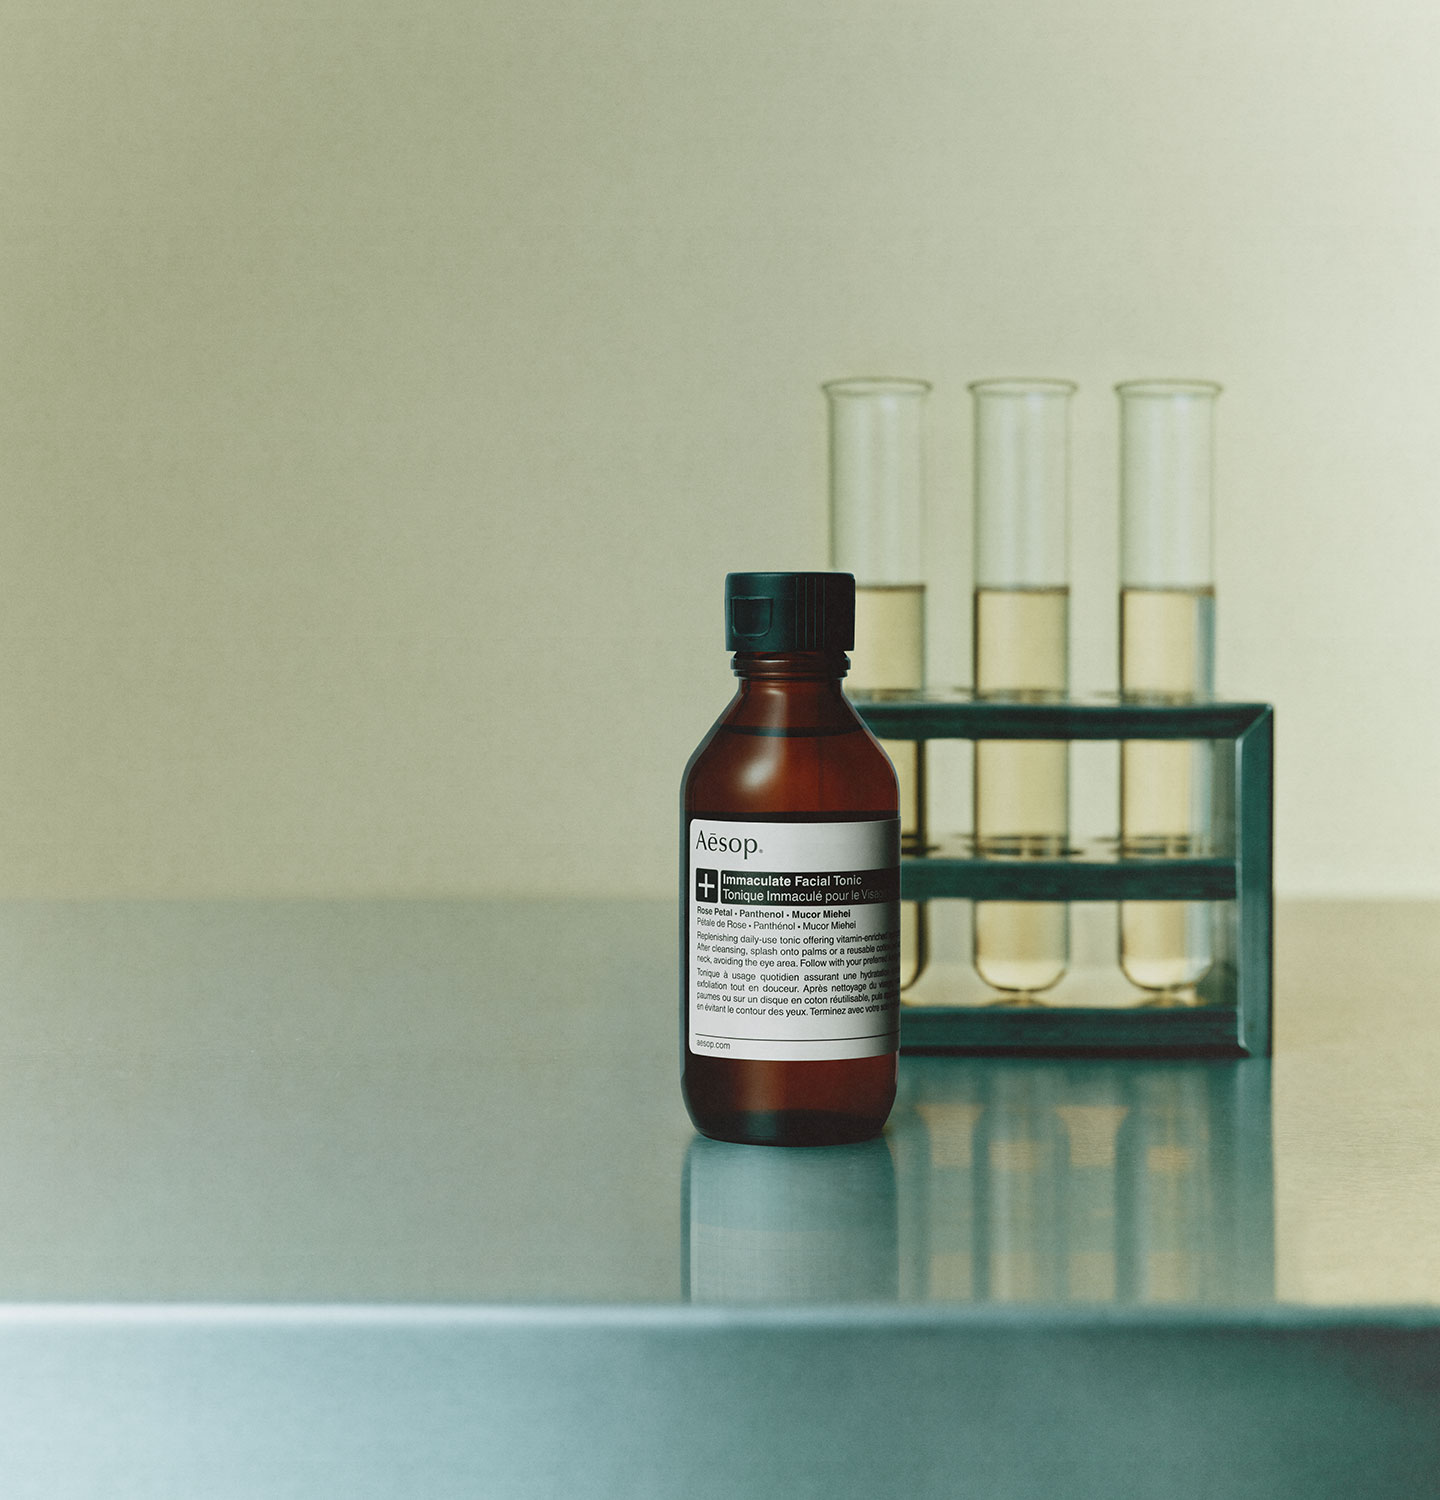 Immaculate facial tonic in amber glass bottle placed on metalic surface next to three test tubes